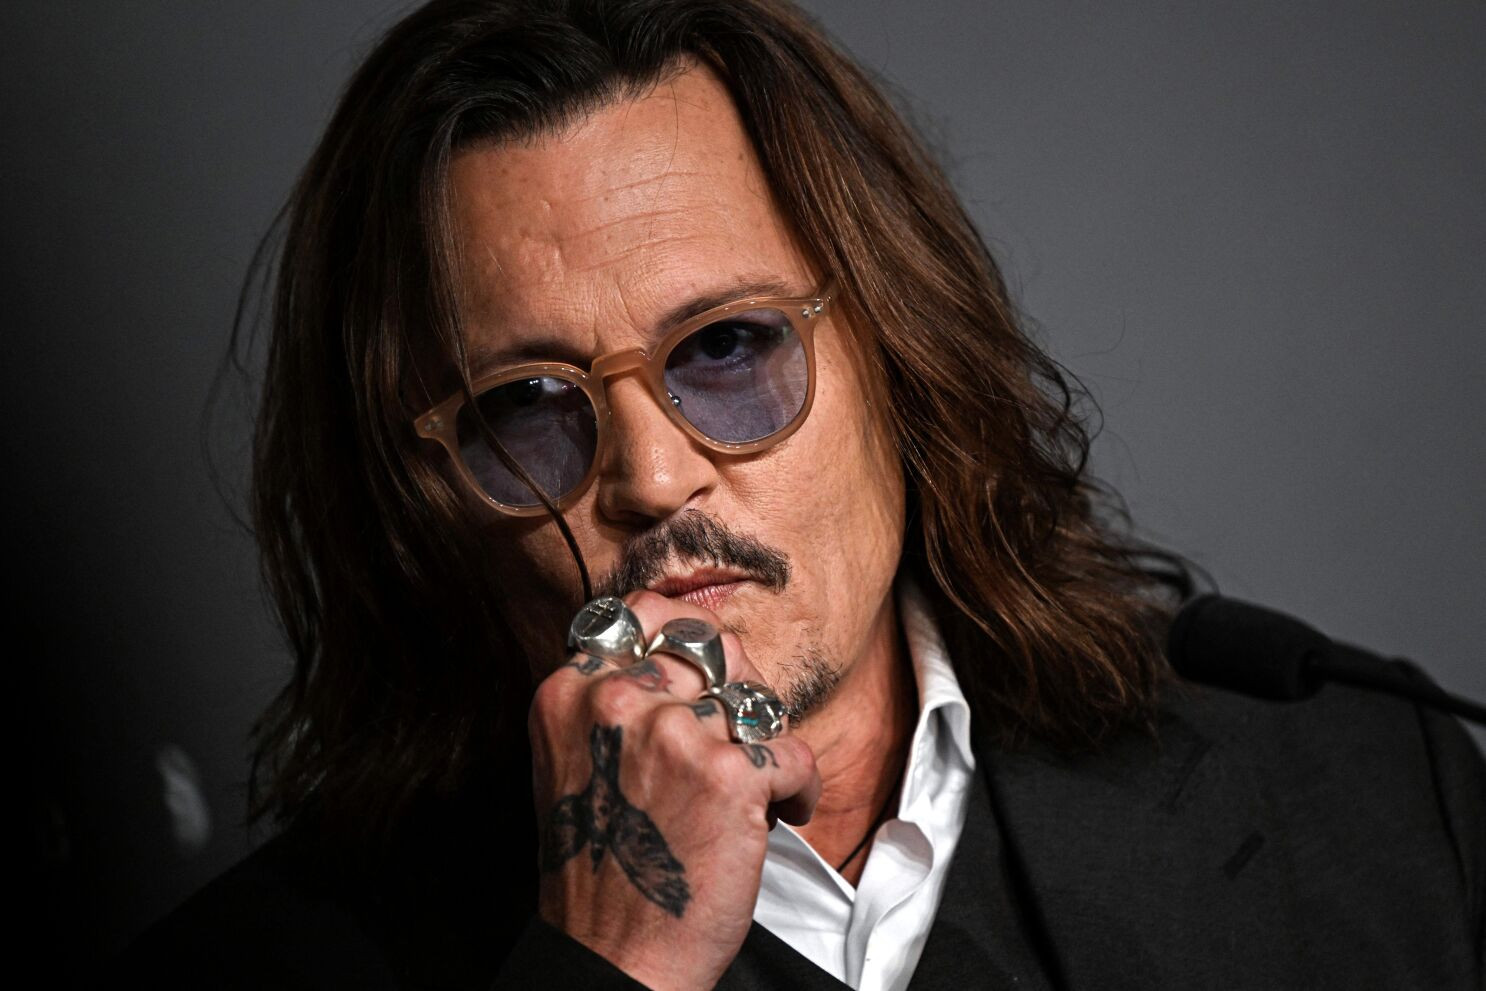 Is Johnny Depp being lauded a disservice to abuse victims?